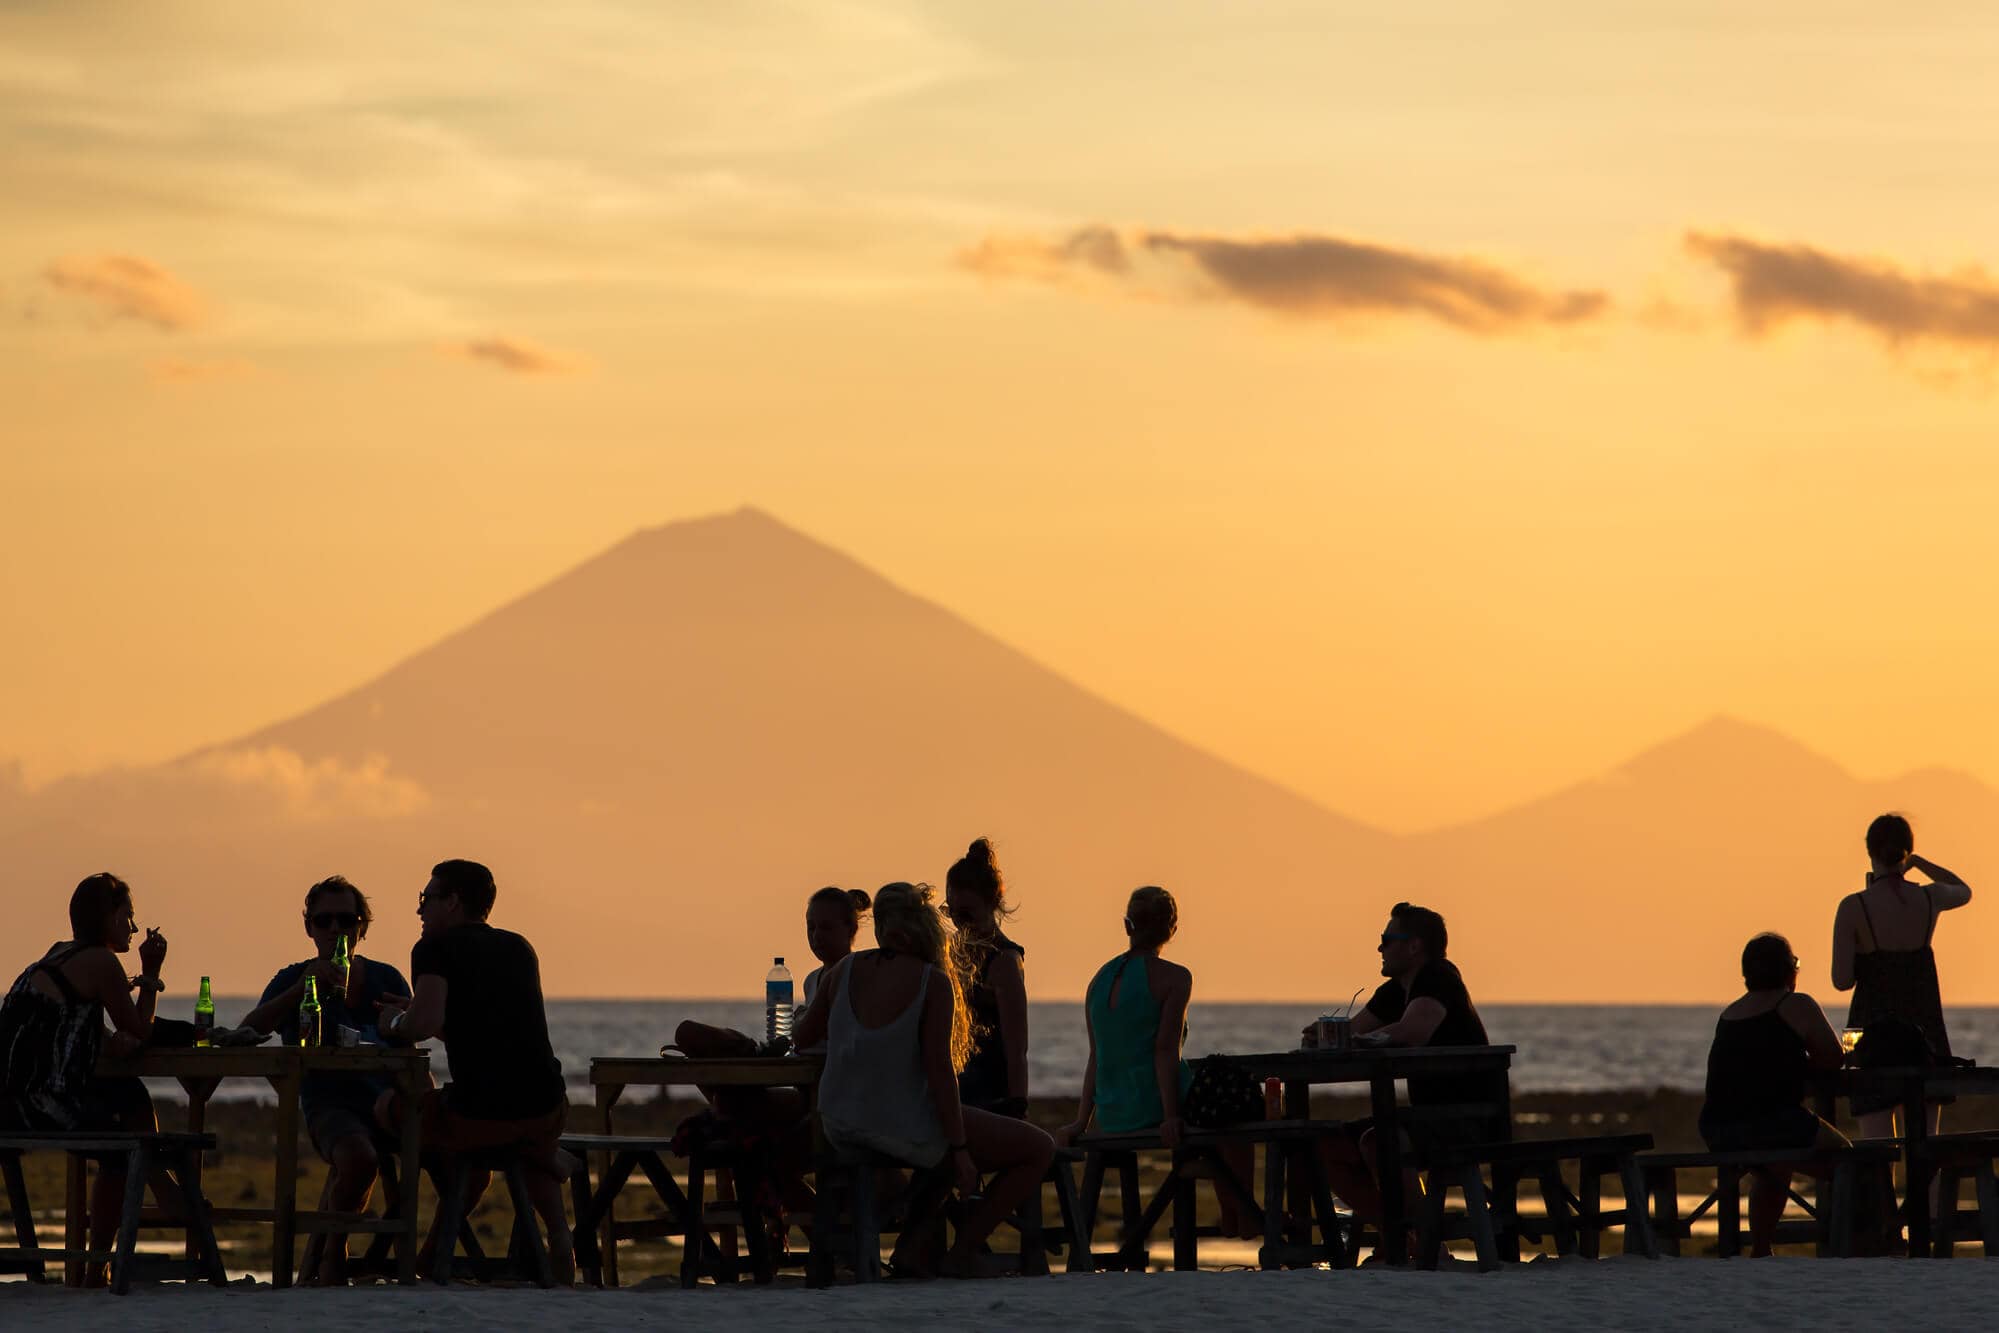 People enjoying an orange sunset at Gili T with Bali's Mount Batur in the background.